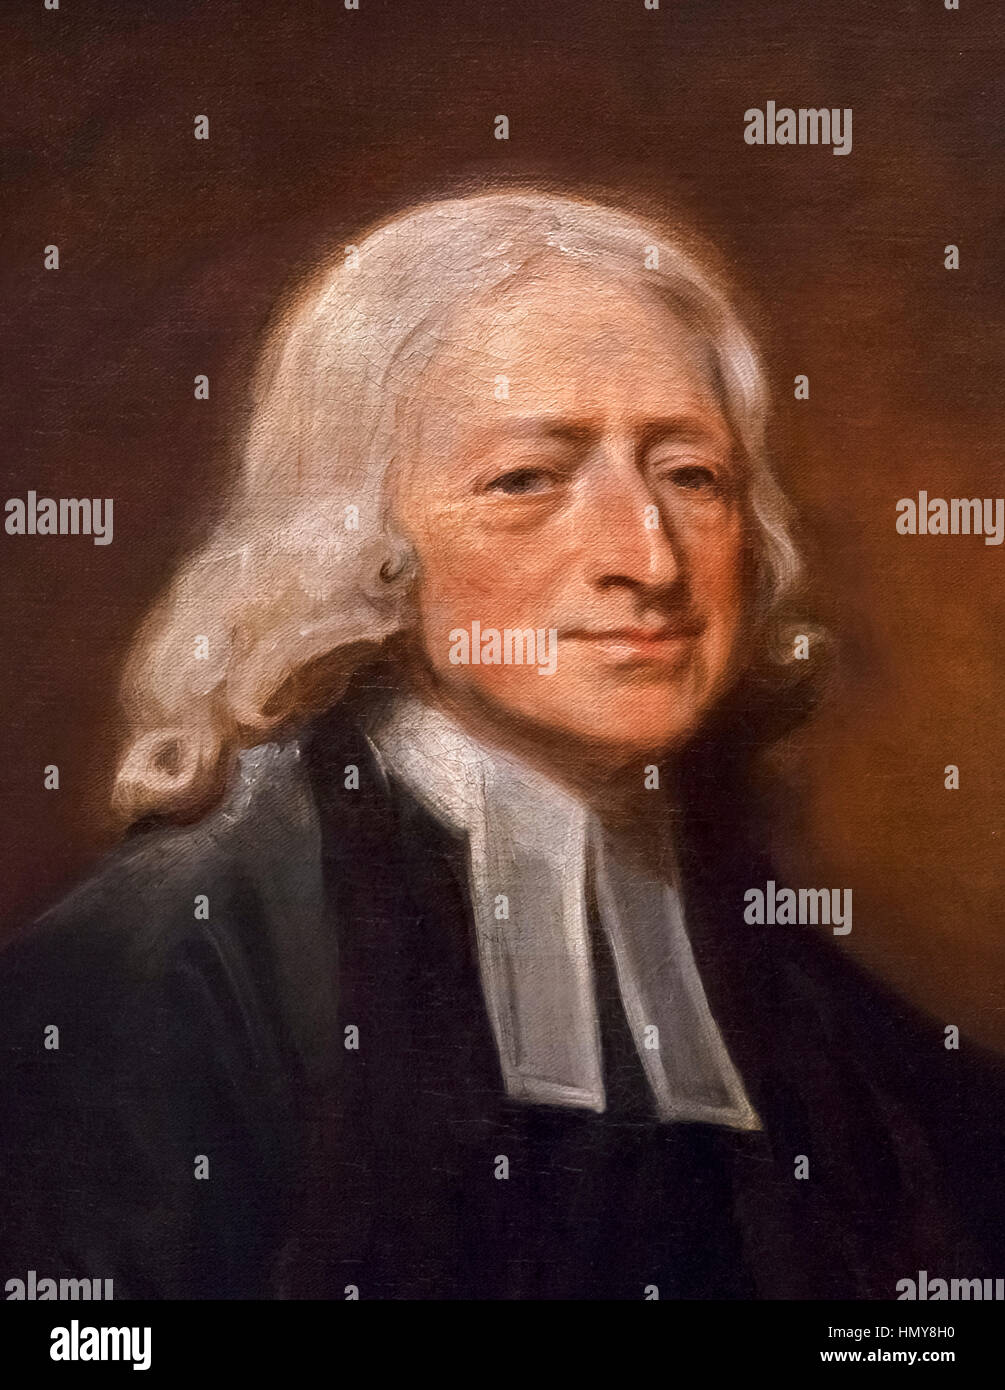 John Wesley. Portrait of the 18thC minister and a founder of the Methodist movement, John Wesley (1703-1791), by George Romney, oil on canvas, c.1788-9 Stock Photo